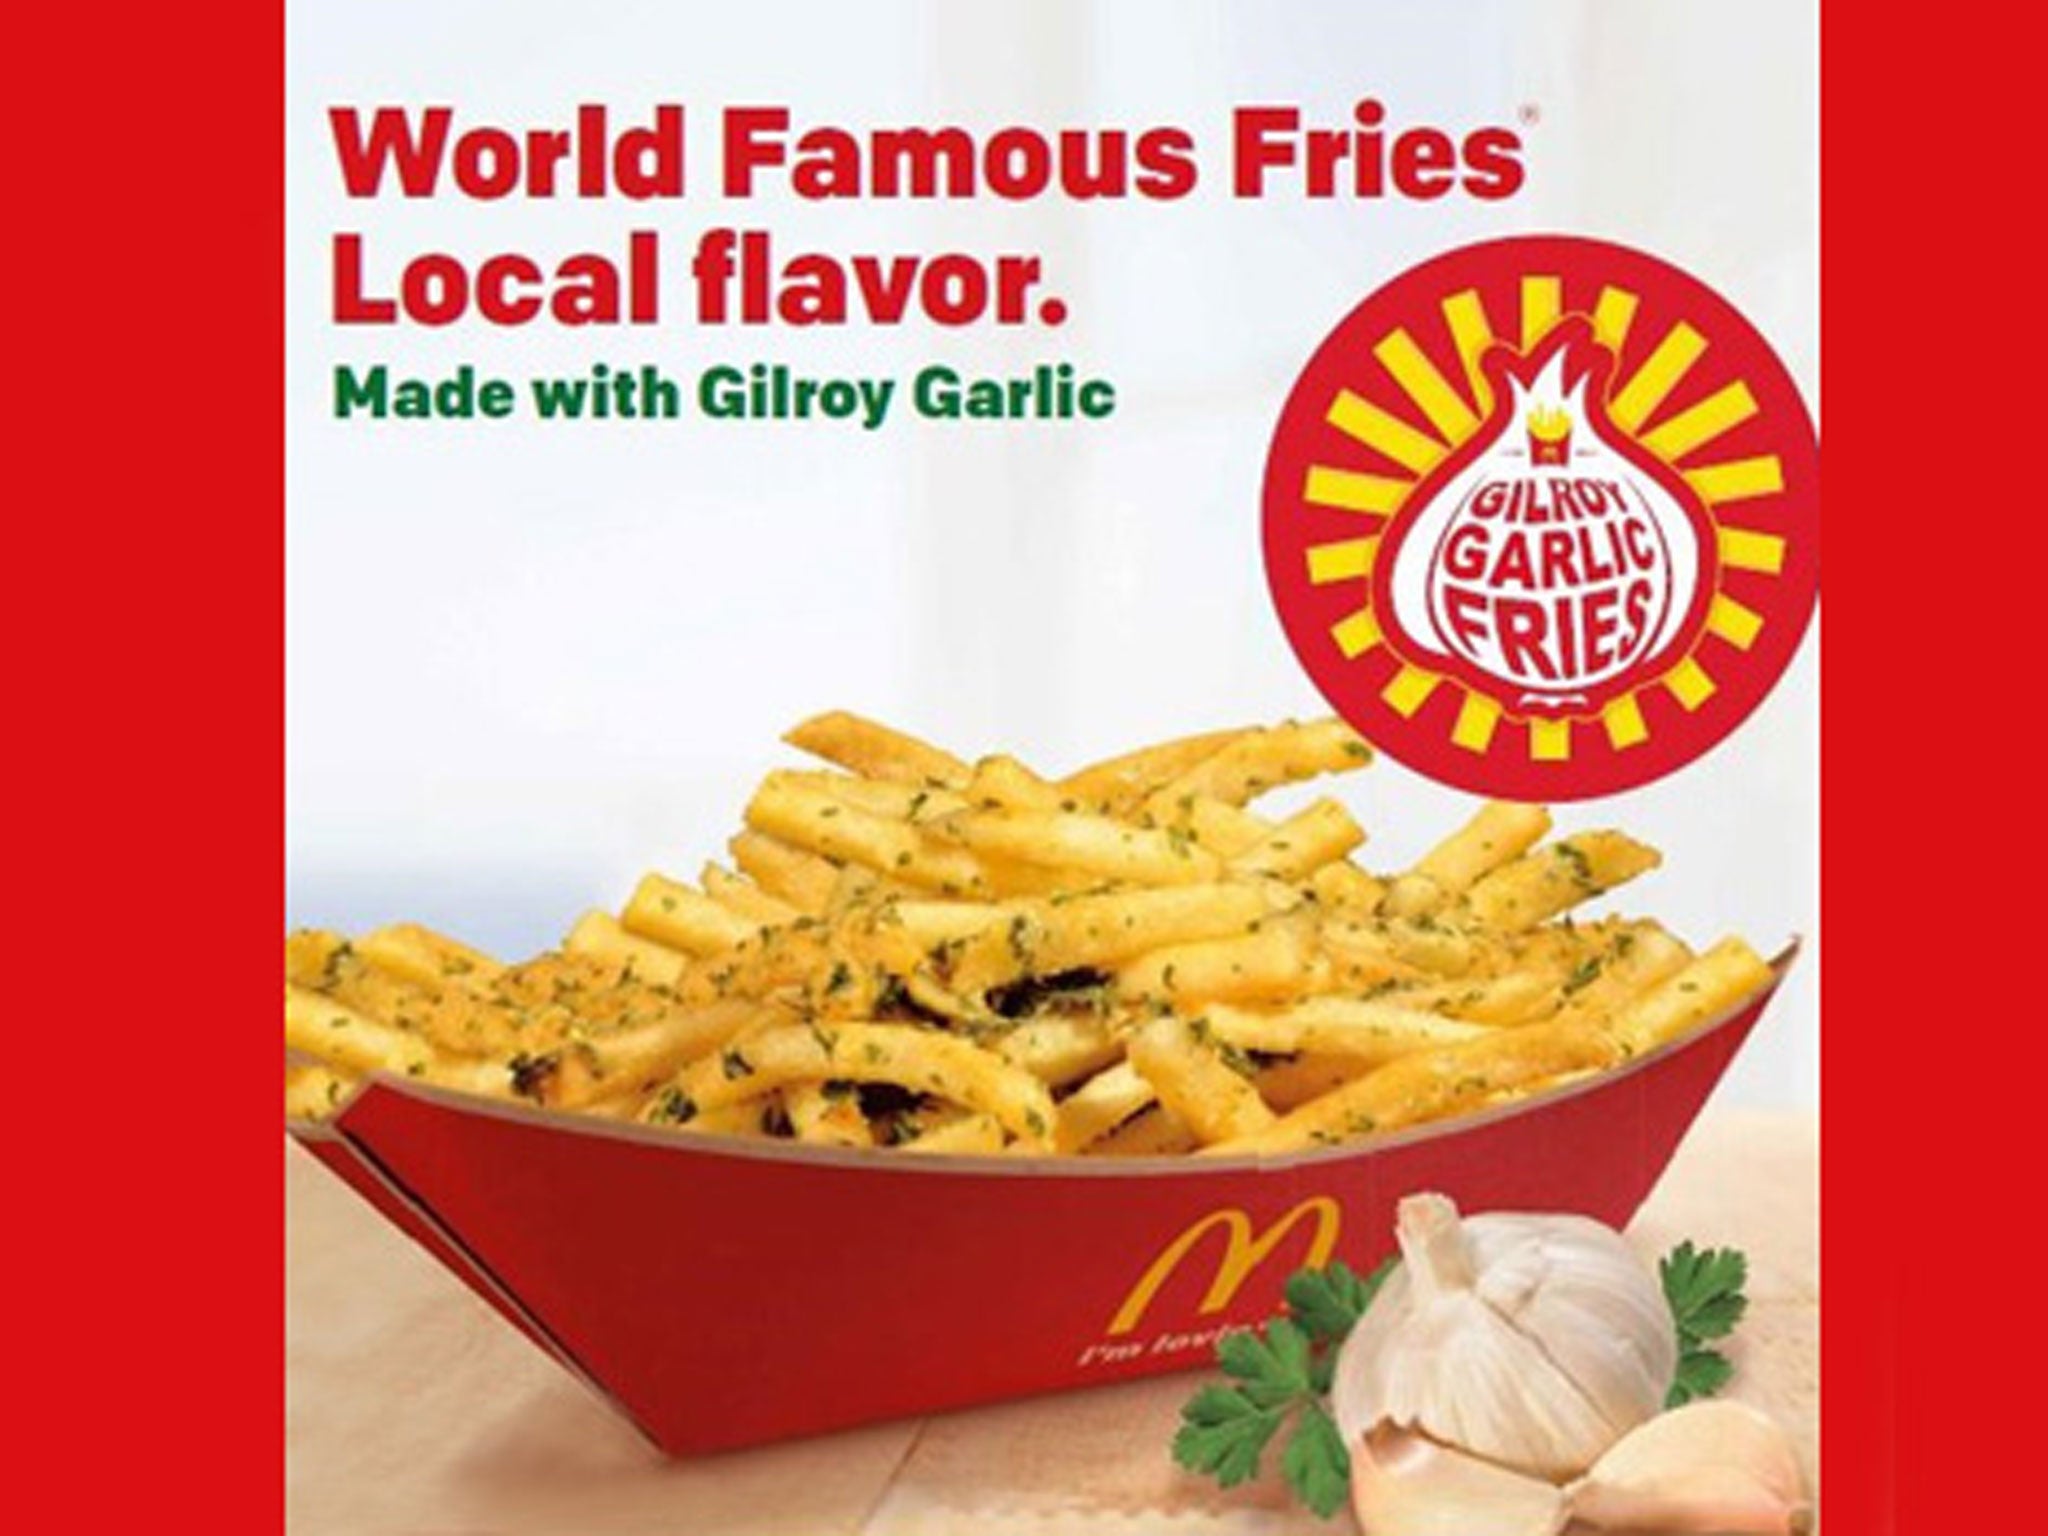 Garlic fries are the latest new addition in a long line of new McDonald’s products